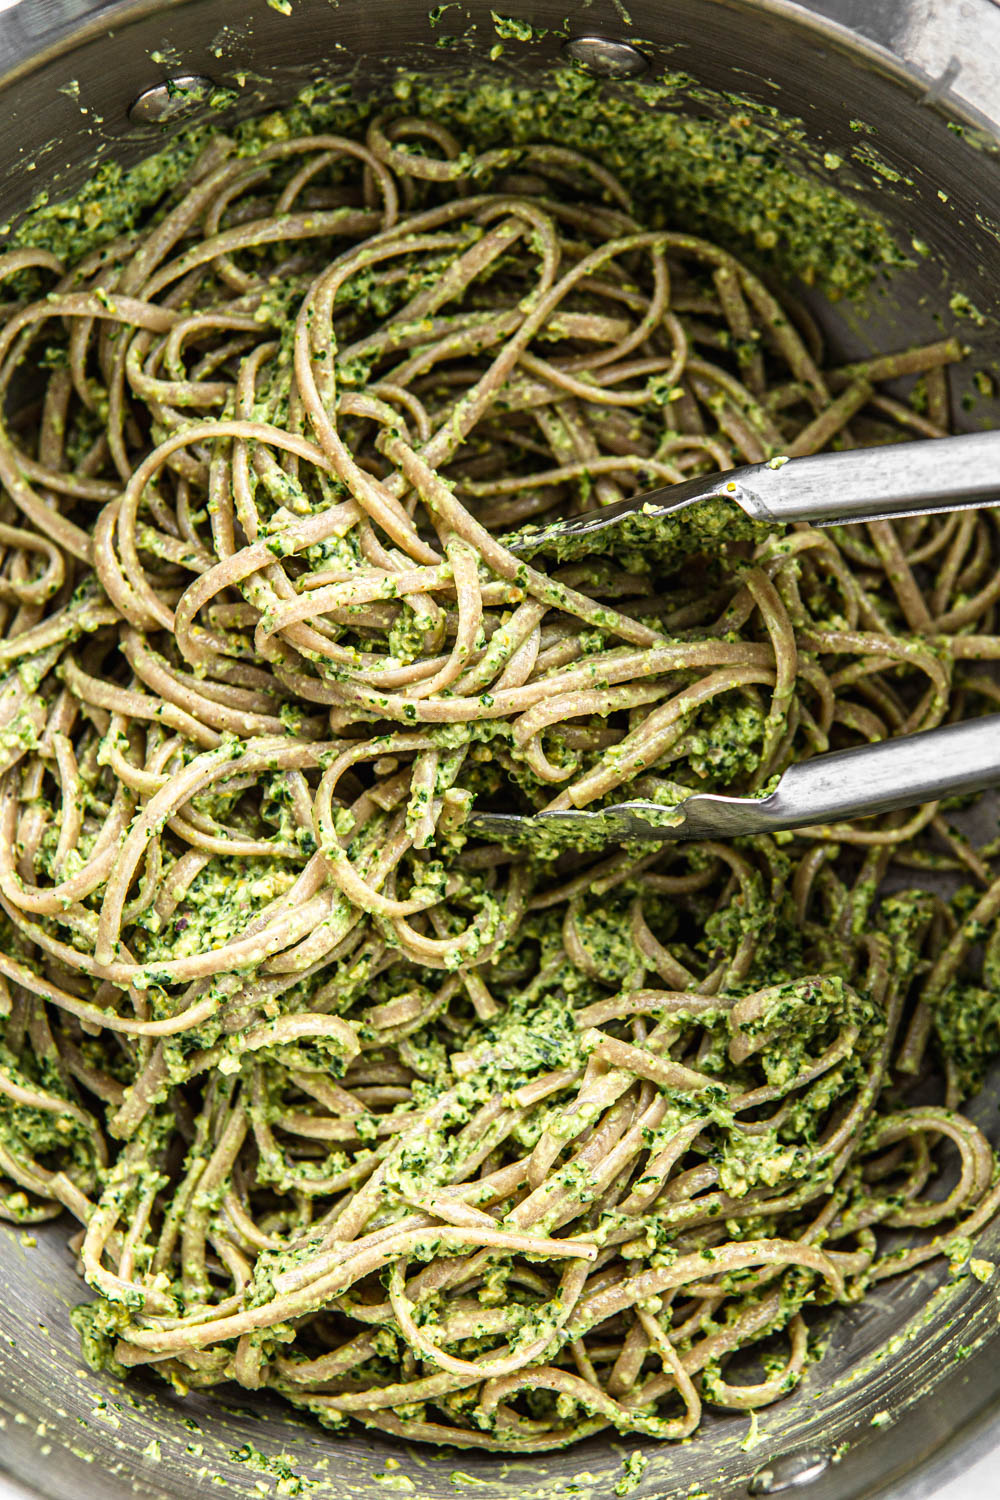 spaghetti tossed with green pesto sauce in a pot